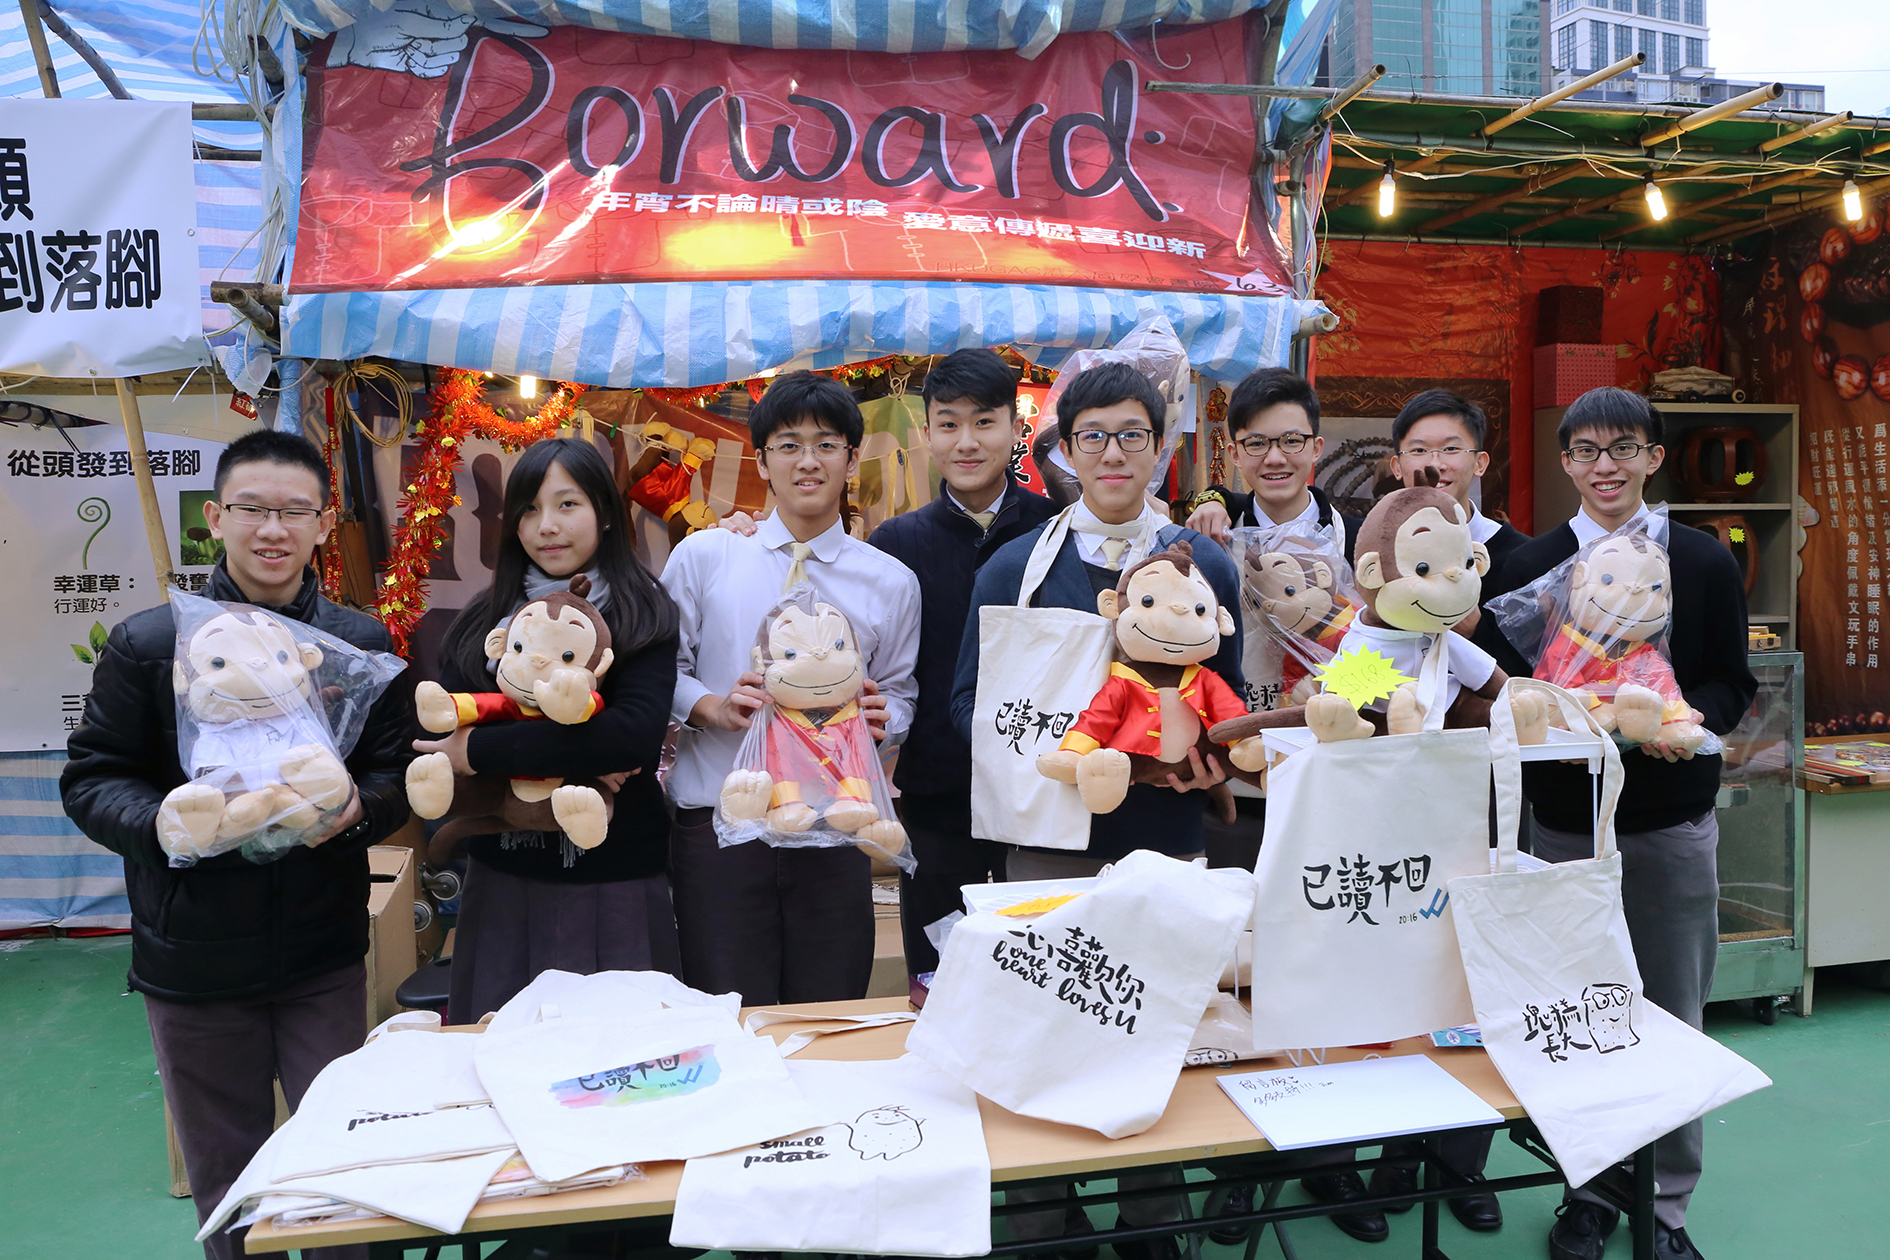 Group photo in front of their booth ‘Forward’.